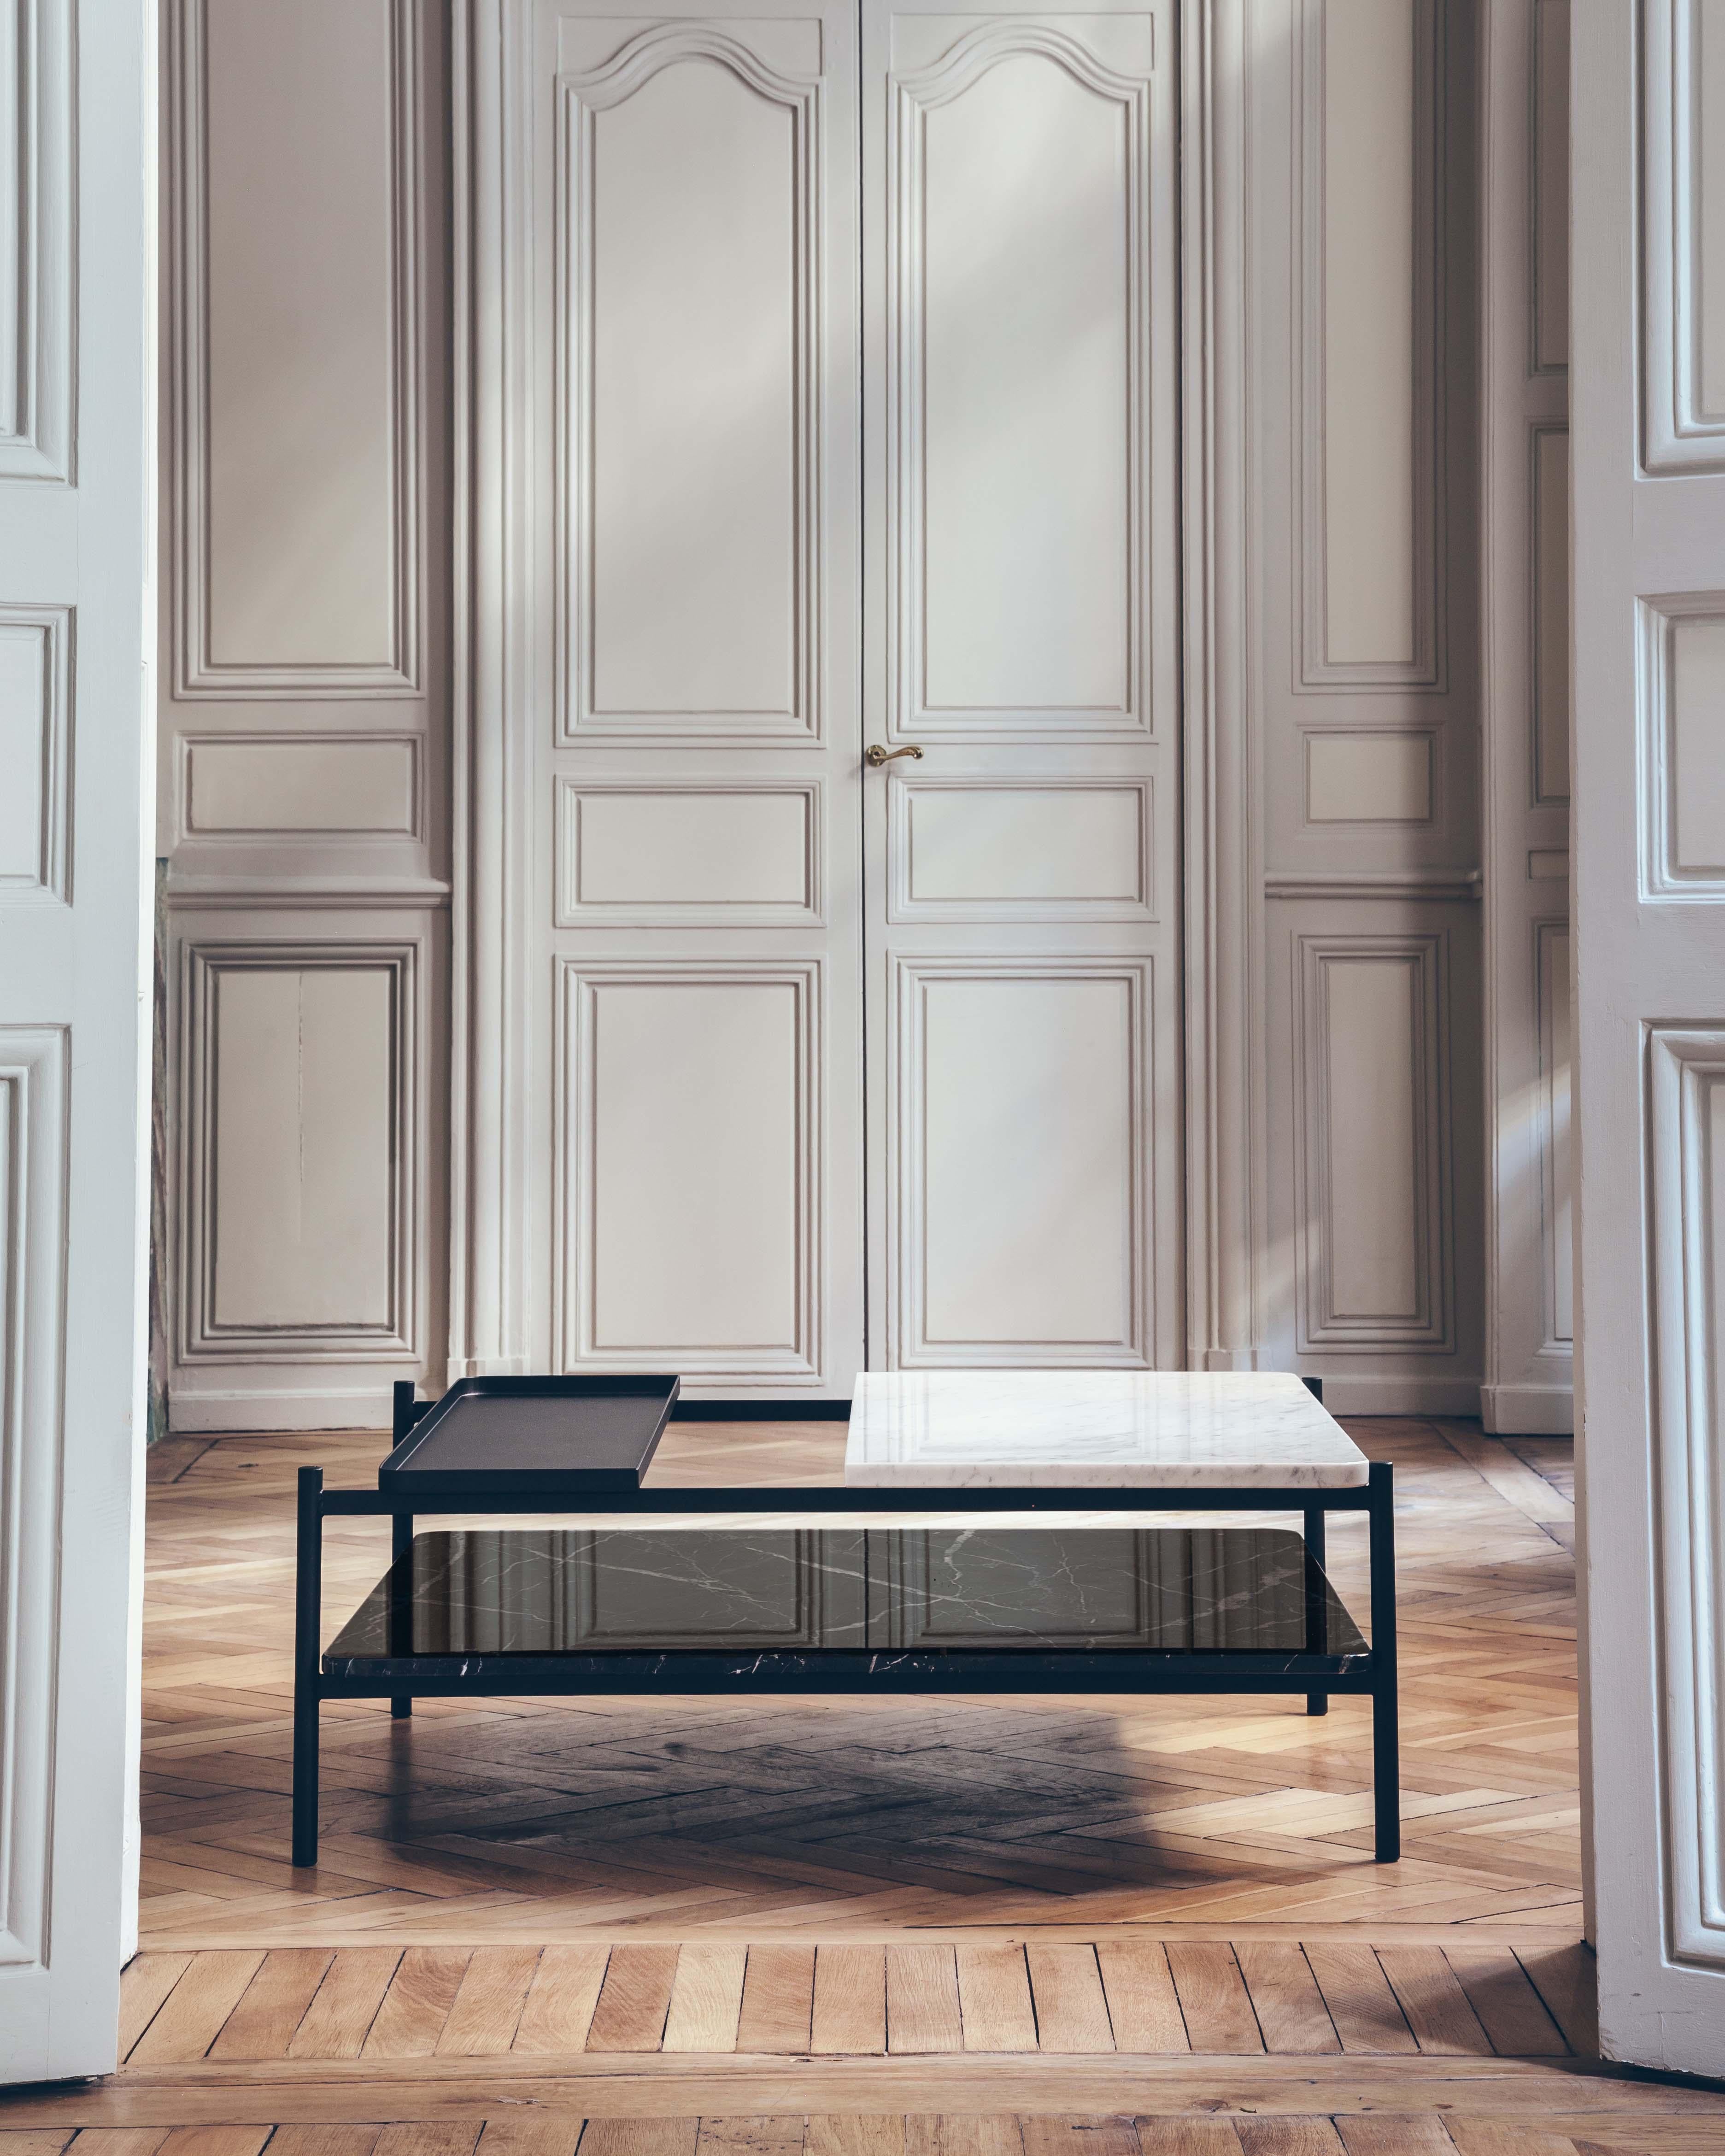 Bagnères, short for Bagnères-de-Bigorre, is located at the foot of the Pyrenees. The name of these tables was carefully chosen for the designer who has personal ties to the area.
The form and concept of the Bagnères coffee and console tables